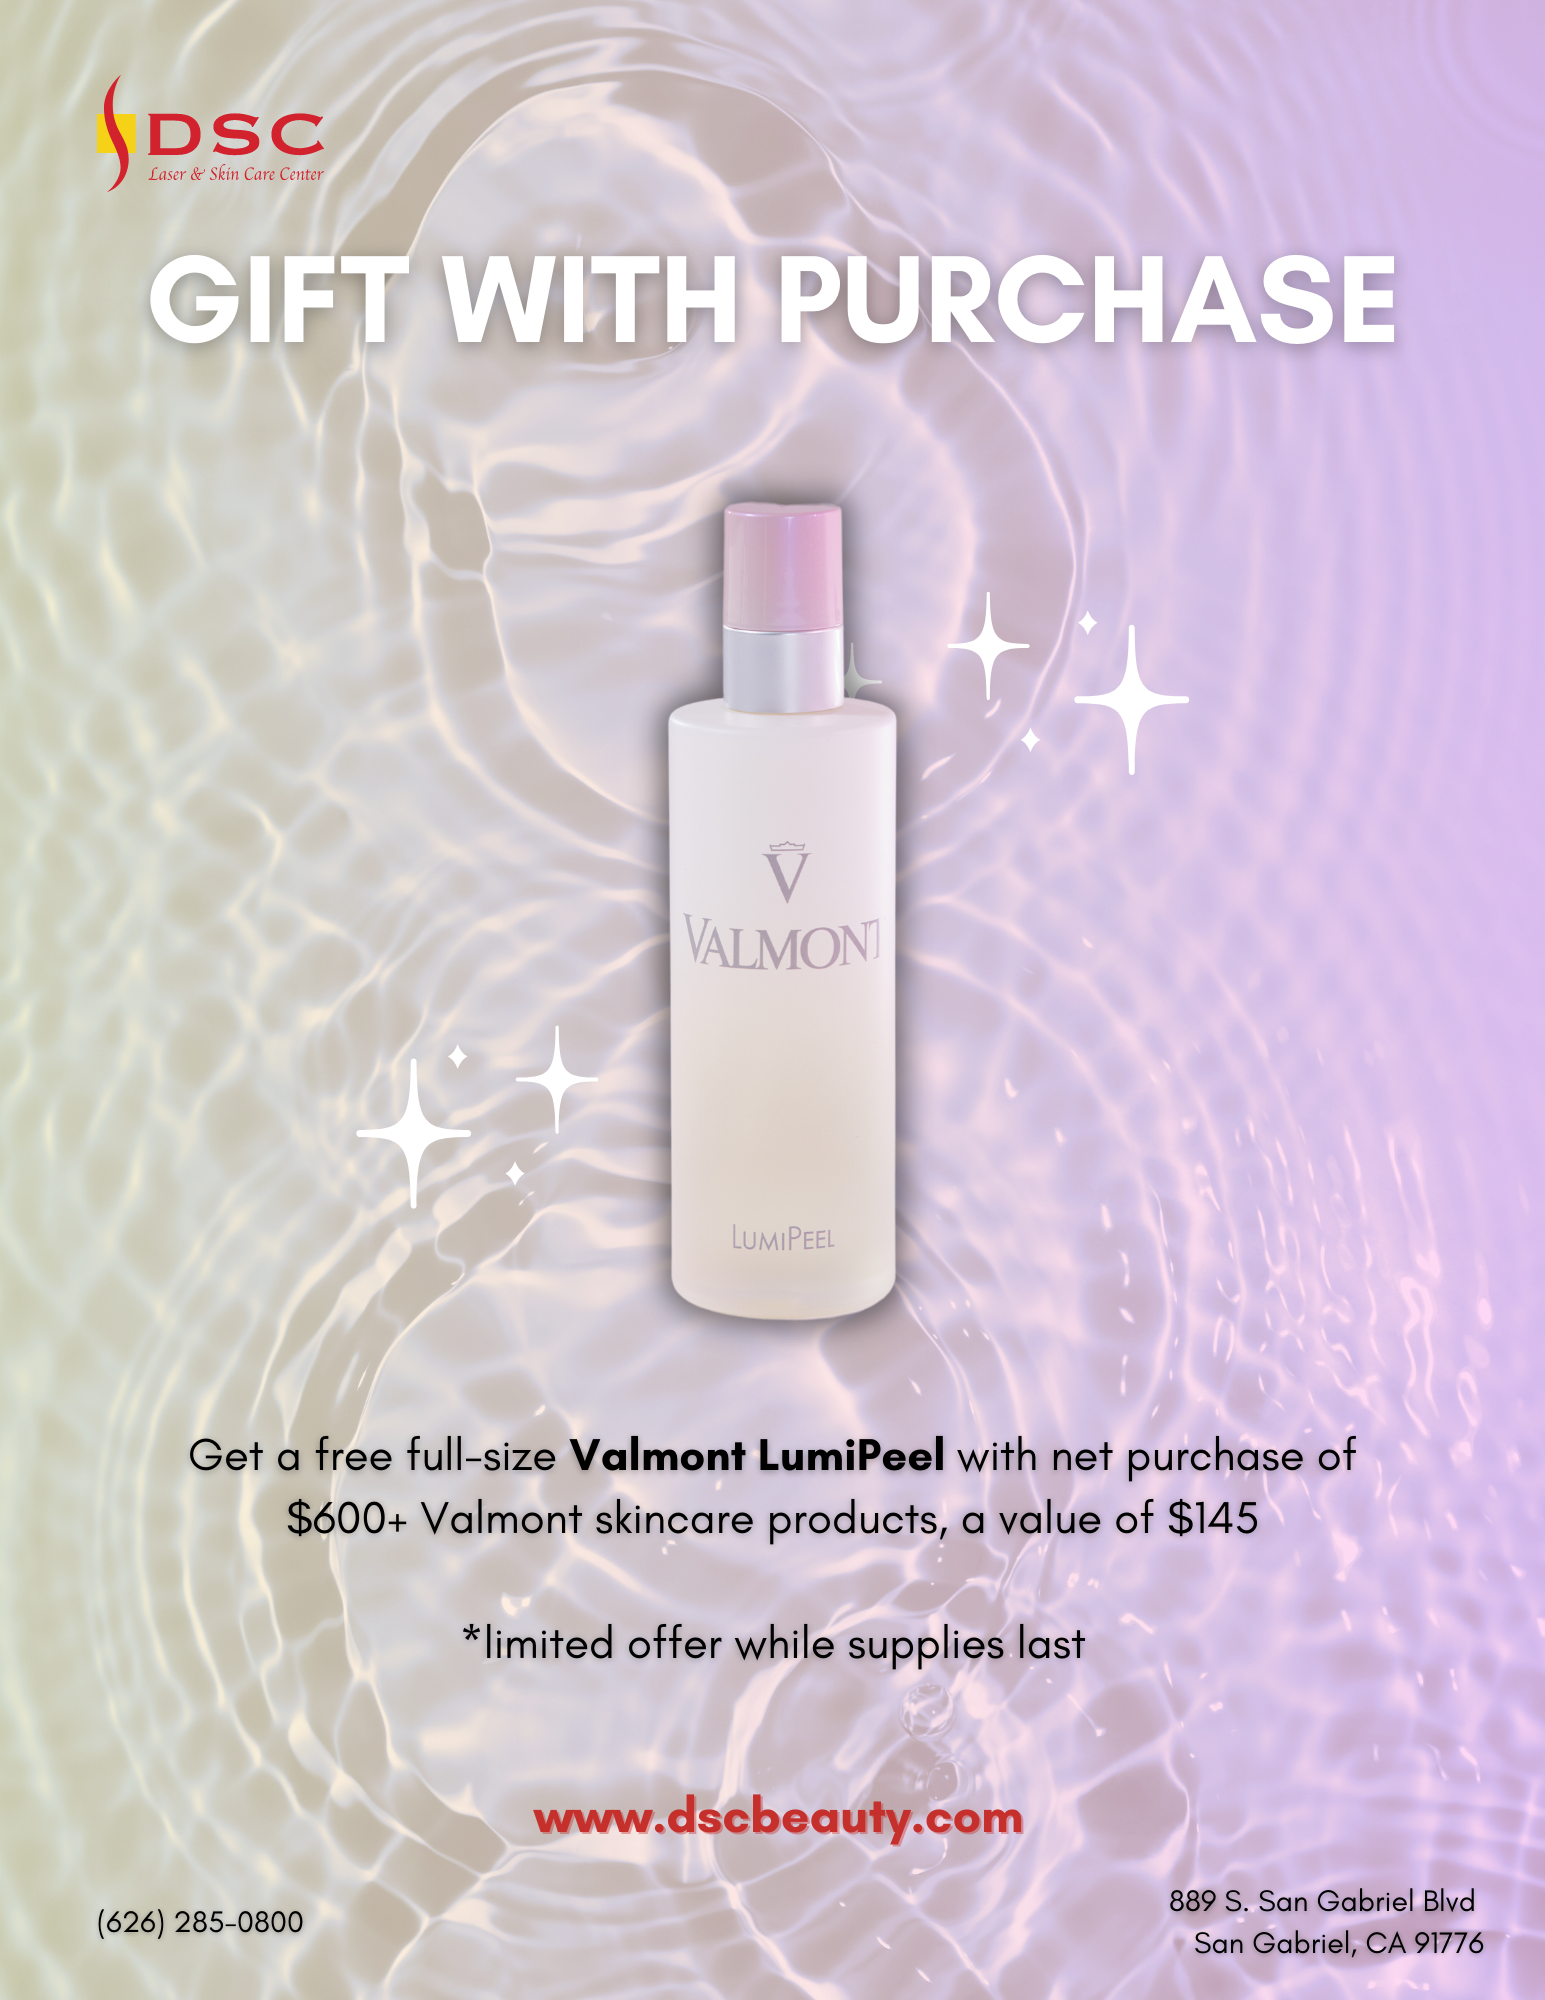 free valmont lumipeel with $600 purchase of Valmont products, featuring Valmont Lumipeel product over water ripple gradient background